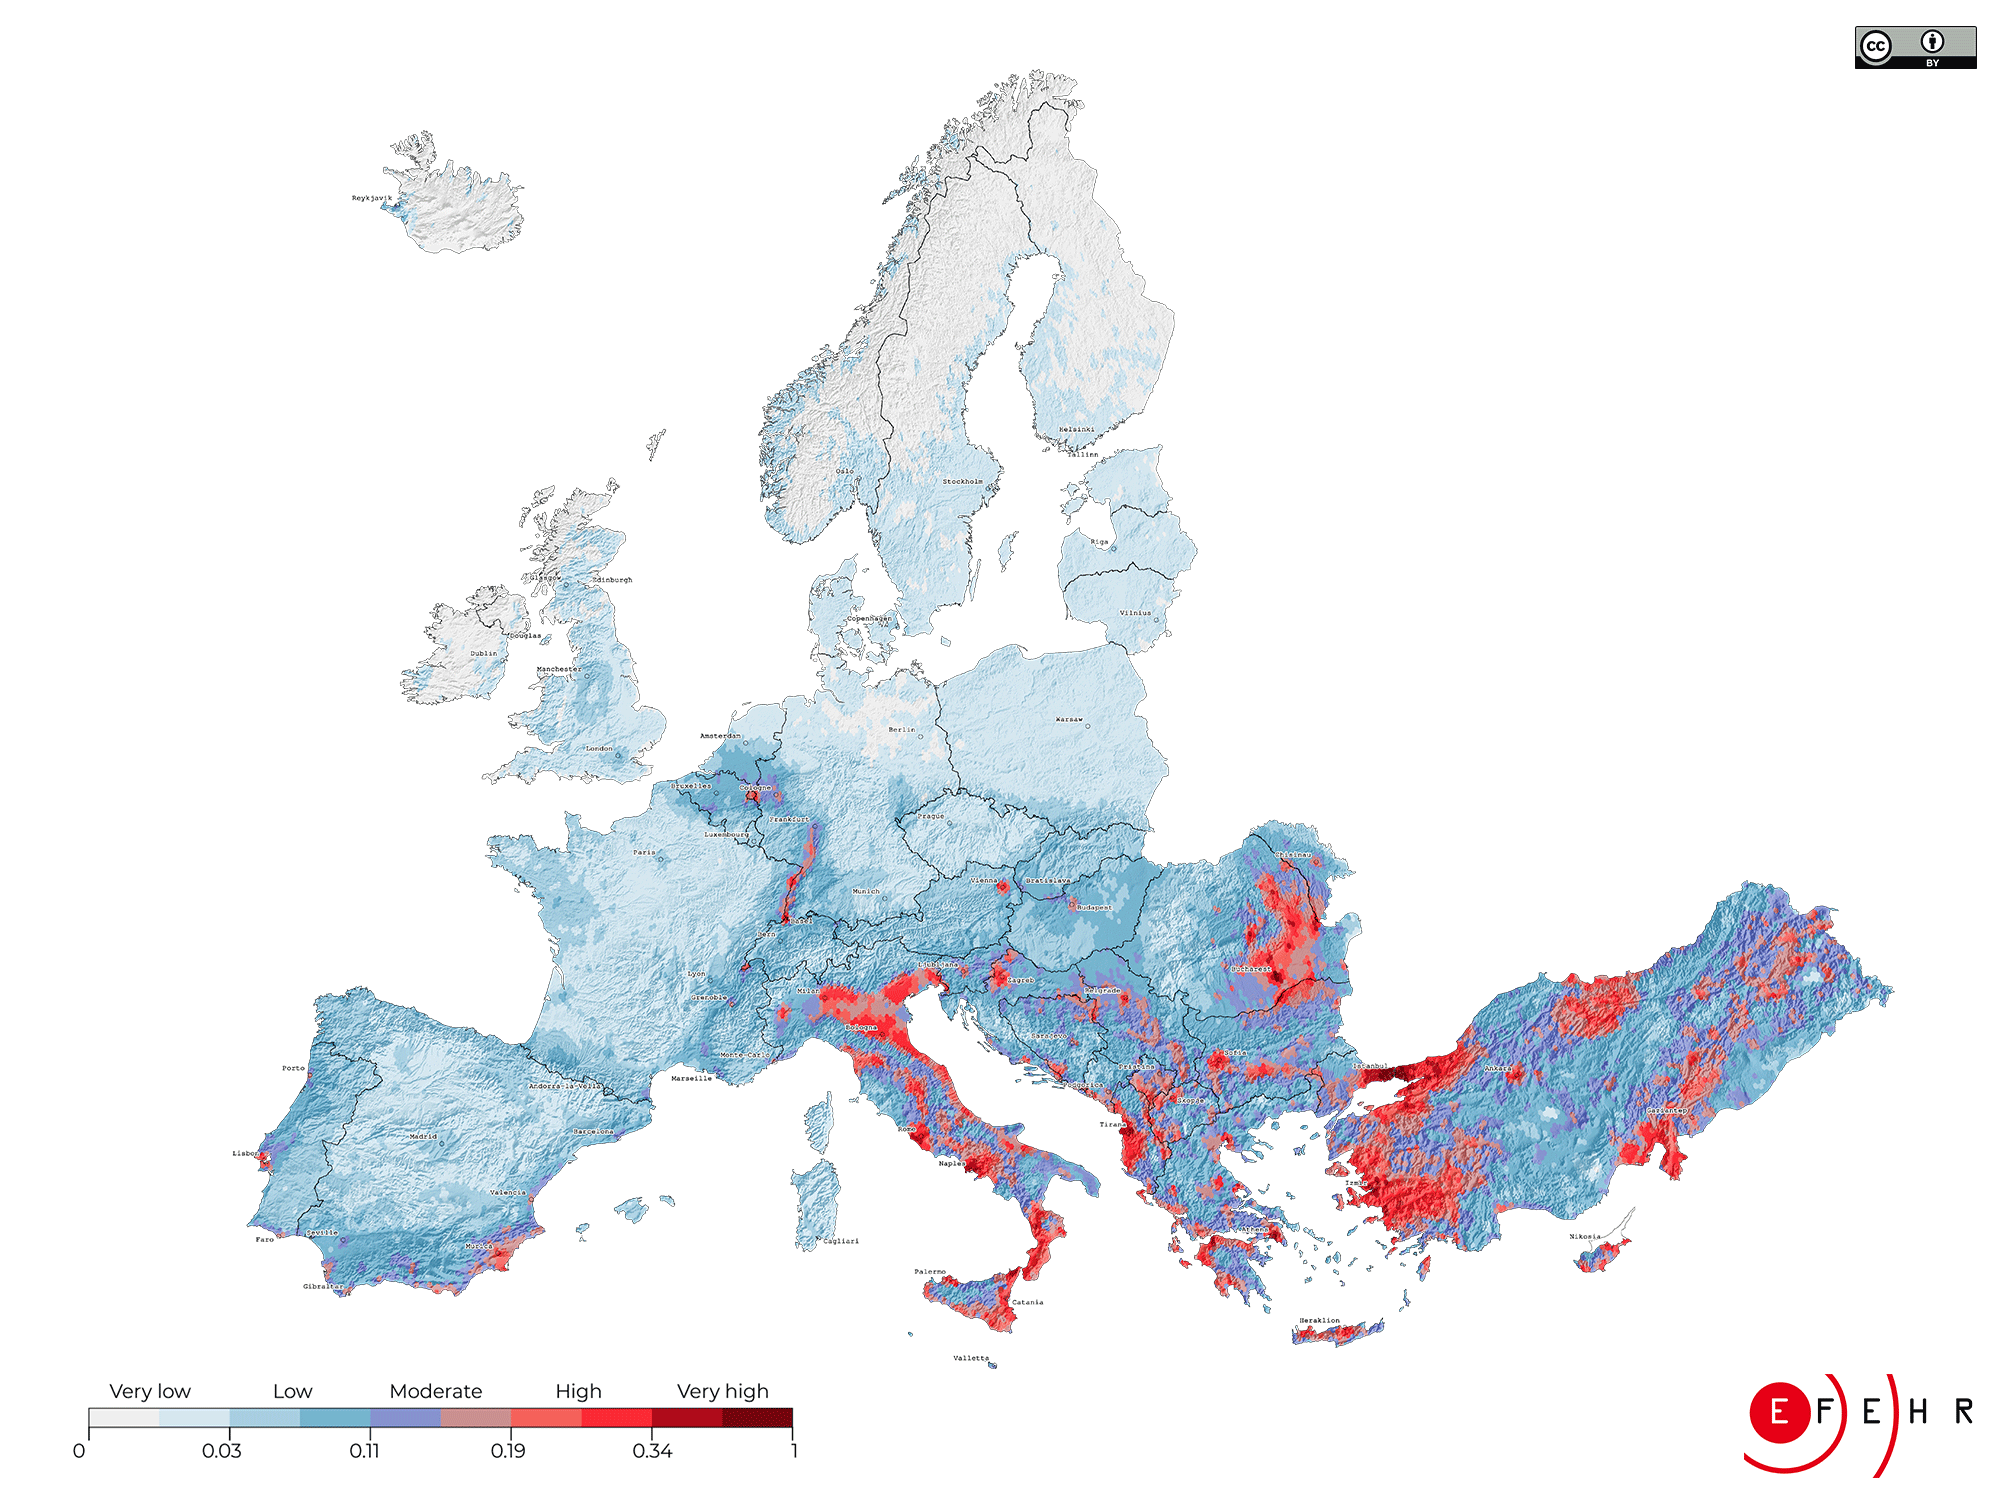 How the read the earthquake risk map of Europe? 